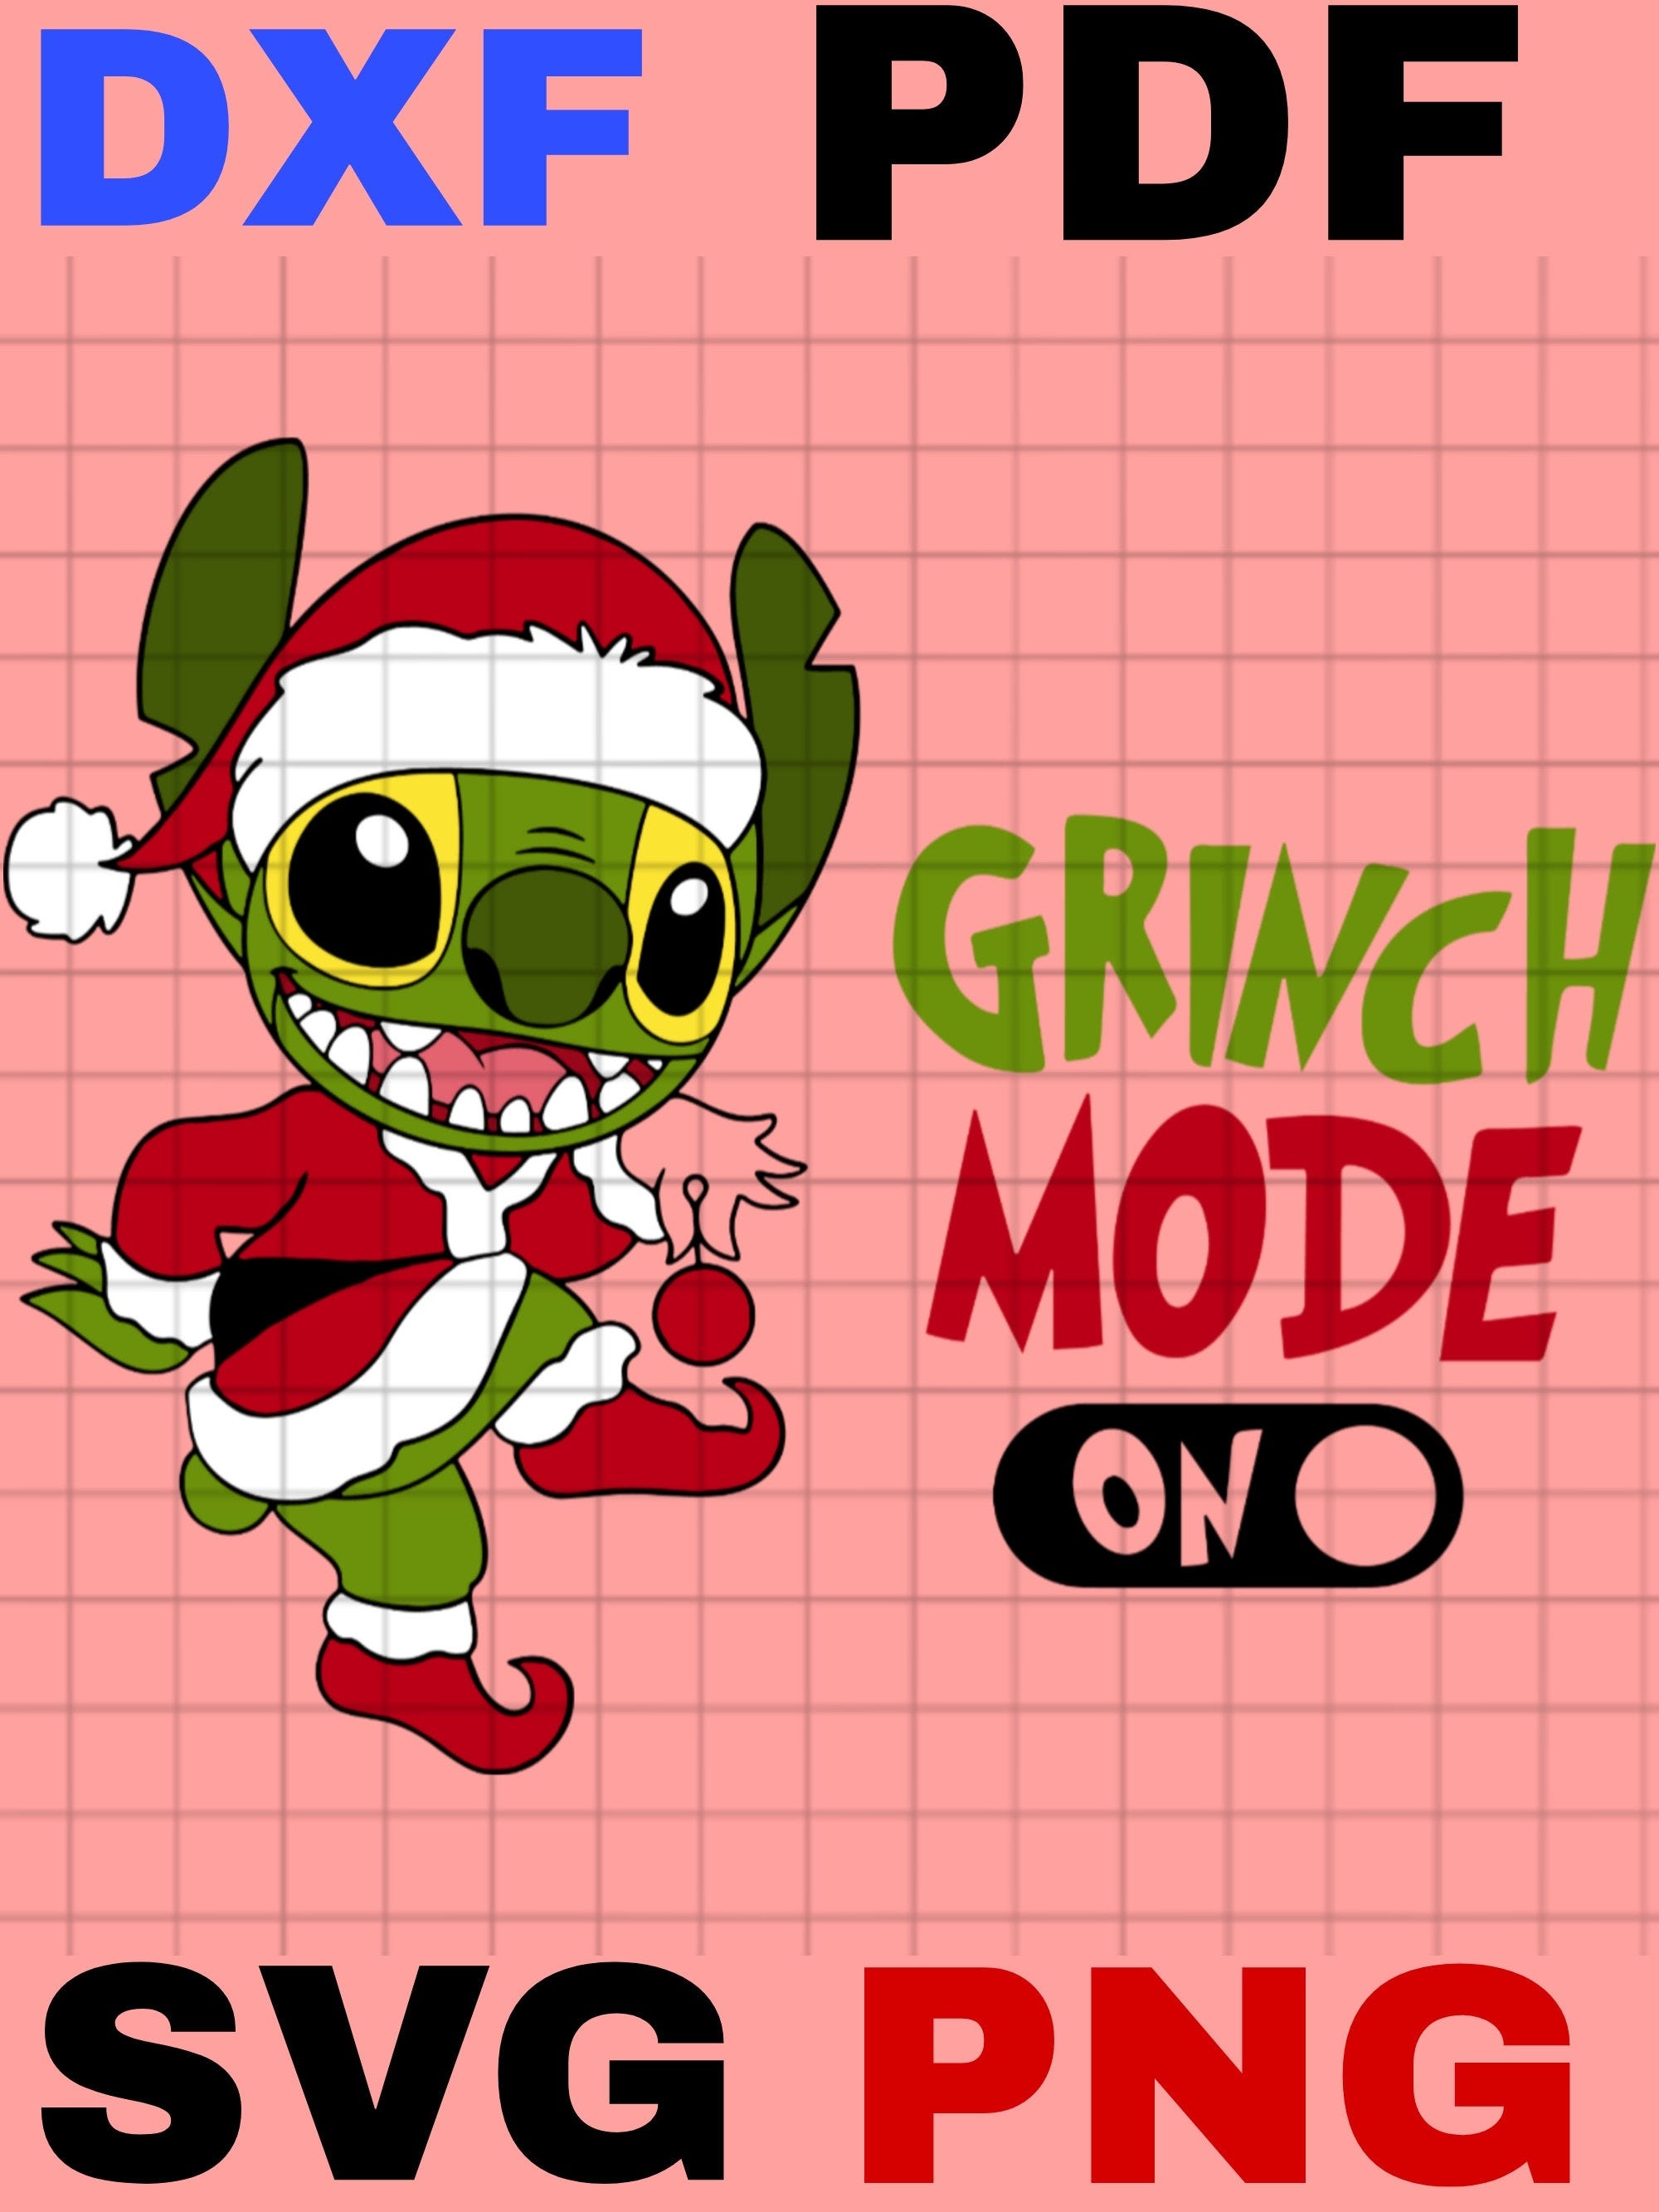 Santa Stitch Christmas Mode On Svg Png, Layered Xmas Stitch Svg, Holiday Stitch Png, Svg Files For Cricut, Instant Download